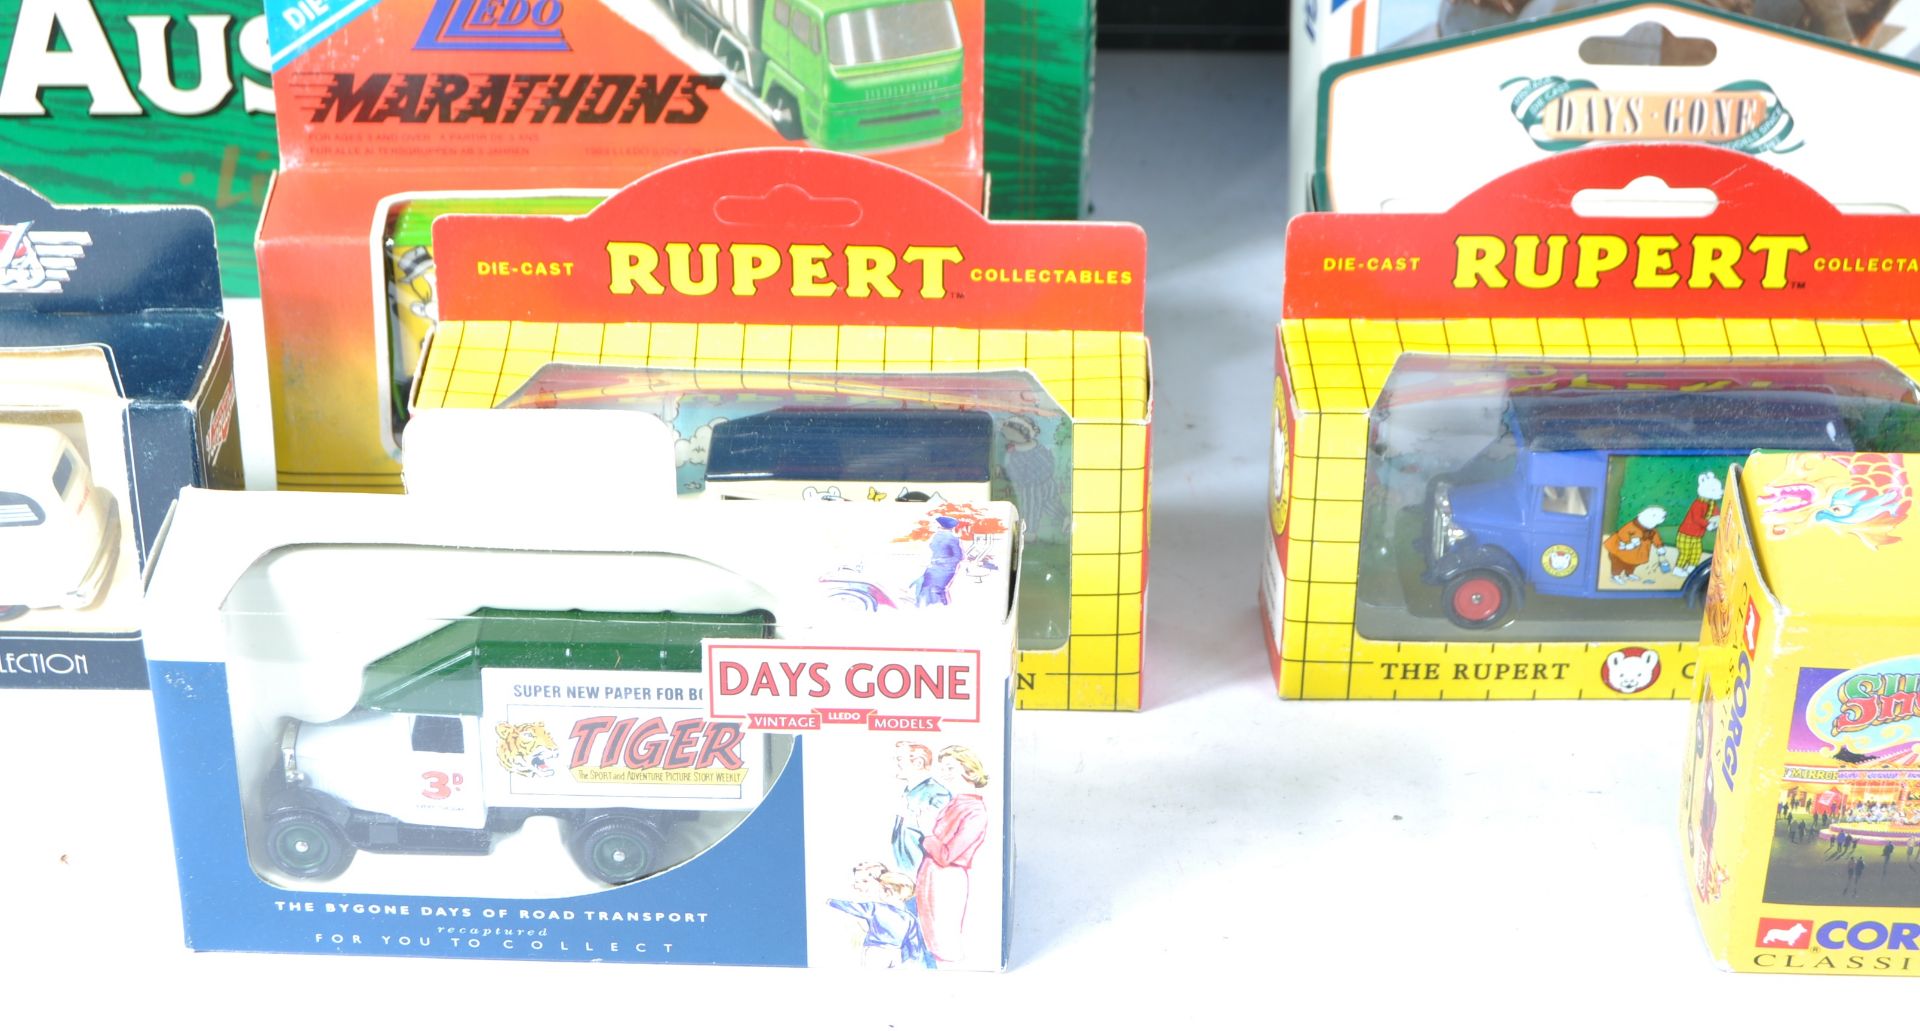 COLLECTION OF ASSORTED BOXED DIECAST MODELS - Image 3 of 6